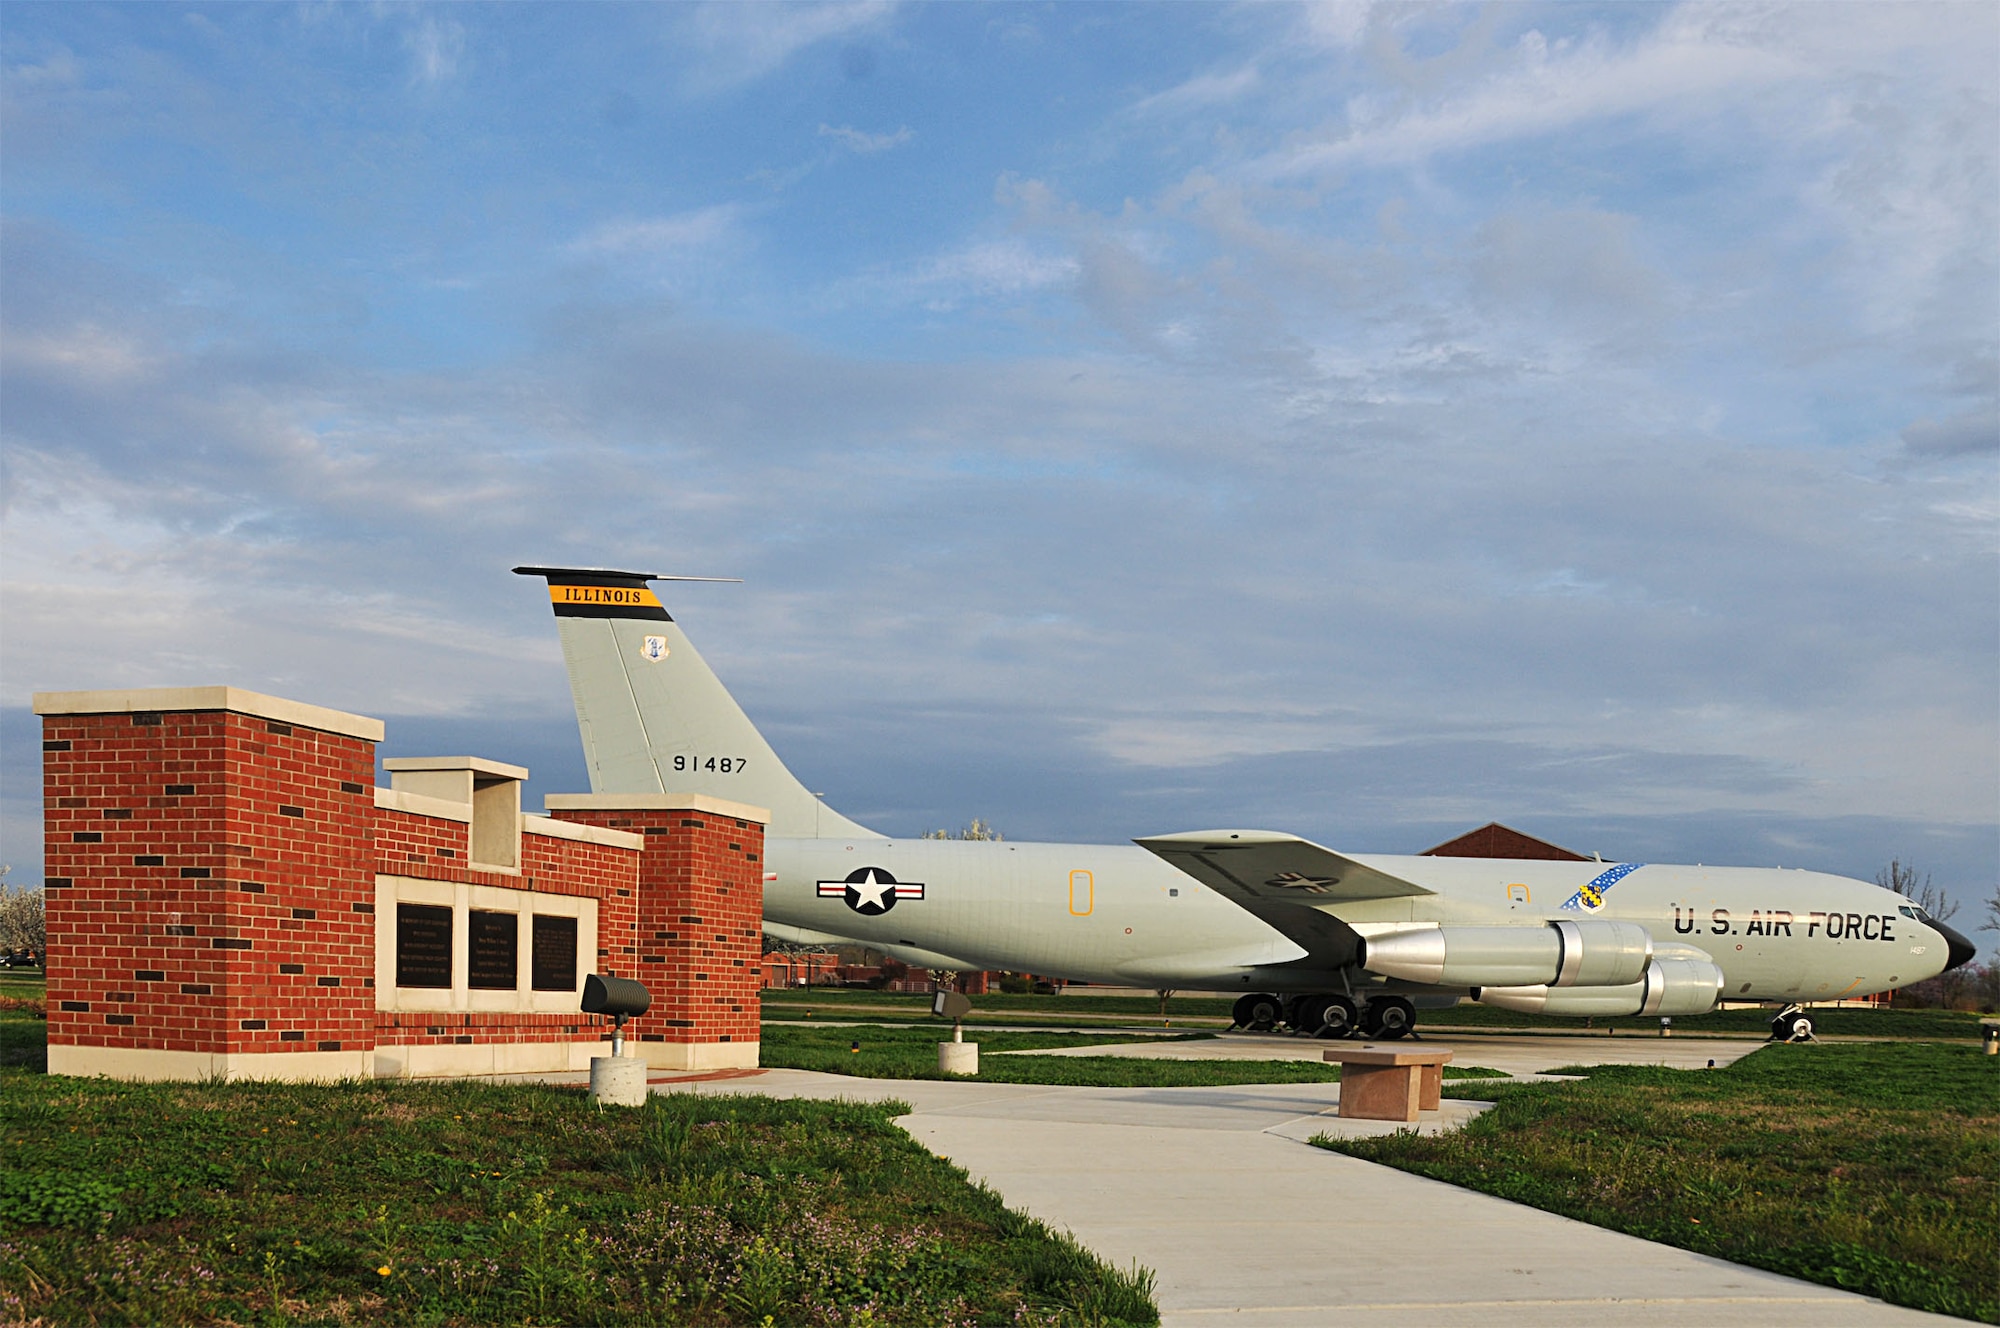 The early morning sun lights up a memorial dedicated to the four 126th Air Refueling Wing aircrew members who perished in an aircraft accident 30 years ago. Maj. William S. Dixon, Jr., Capt. Kenneth L. Herrick, Capt. Robert J. Nicosia and Master Sgt. Richard A. Crome were aboard a Illinois National Guard KC-135A "Stratotanker" while on a routine training mission when their plane exploded near Greenwood, Ill., on March 19, 1982. In addition, 23 members of the 928th Tactical Airlift Group, Air Force Reserves, who were passengers also lost their lives. The 126th Air Refueling Wing, located at Scott AFB, Ill., held a memorial ceremony to commemorate the anniversary of the accident. The static display aircraft in the background is a more recent version of the "Stratotanker", the KC-135E. (National Guard photo by Master Sgt. Ken Stephens)